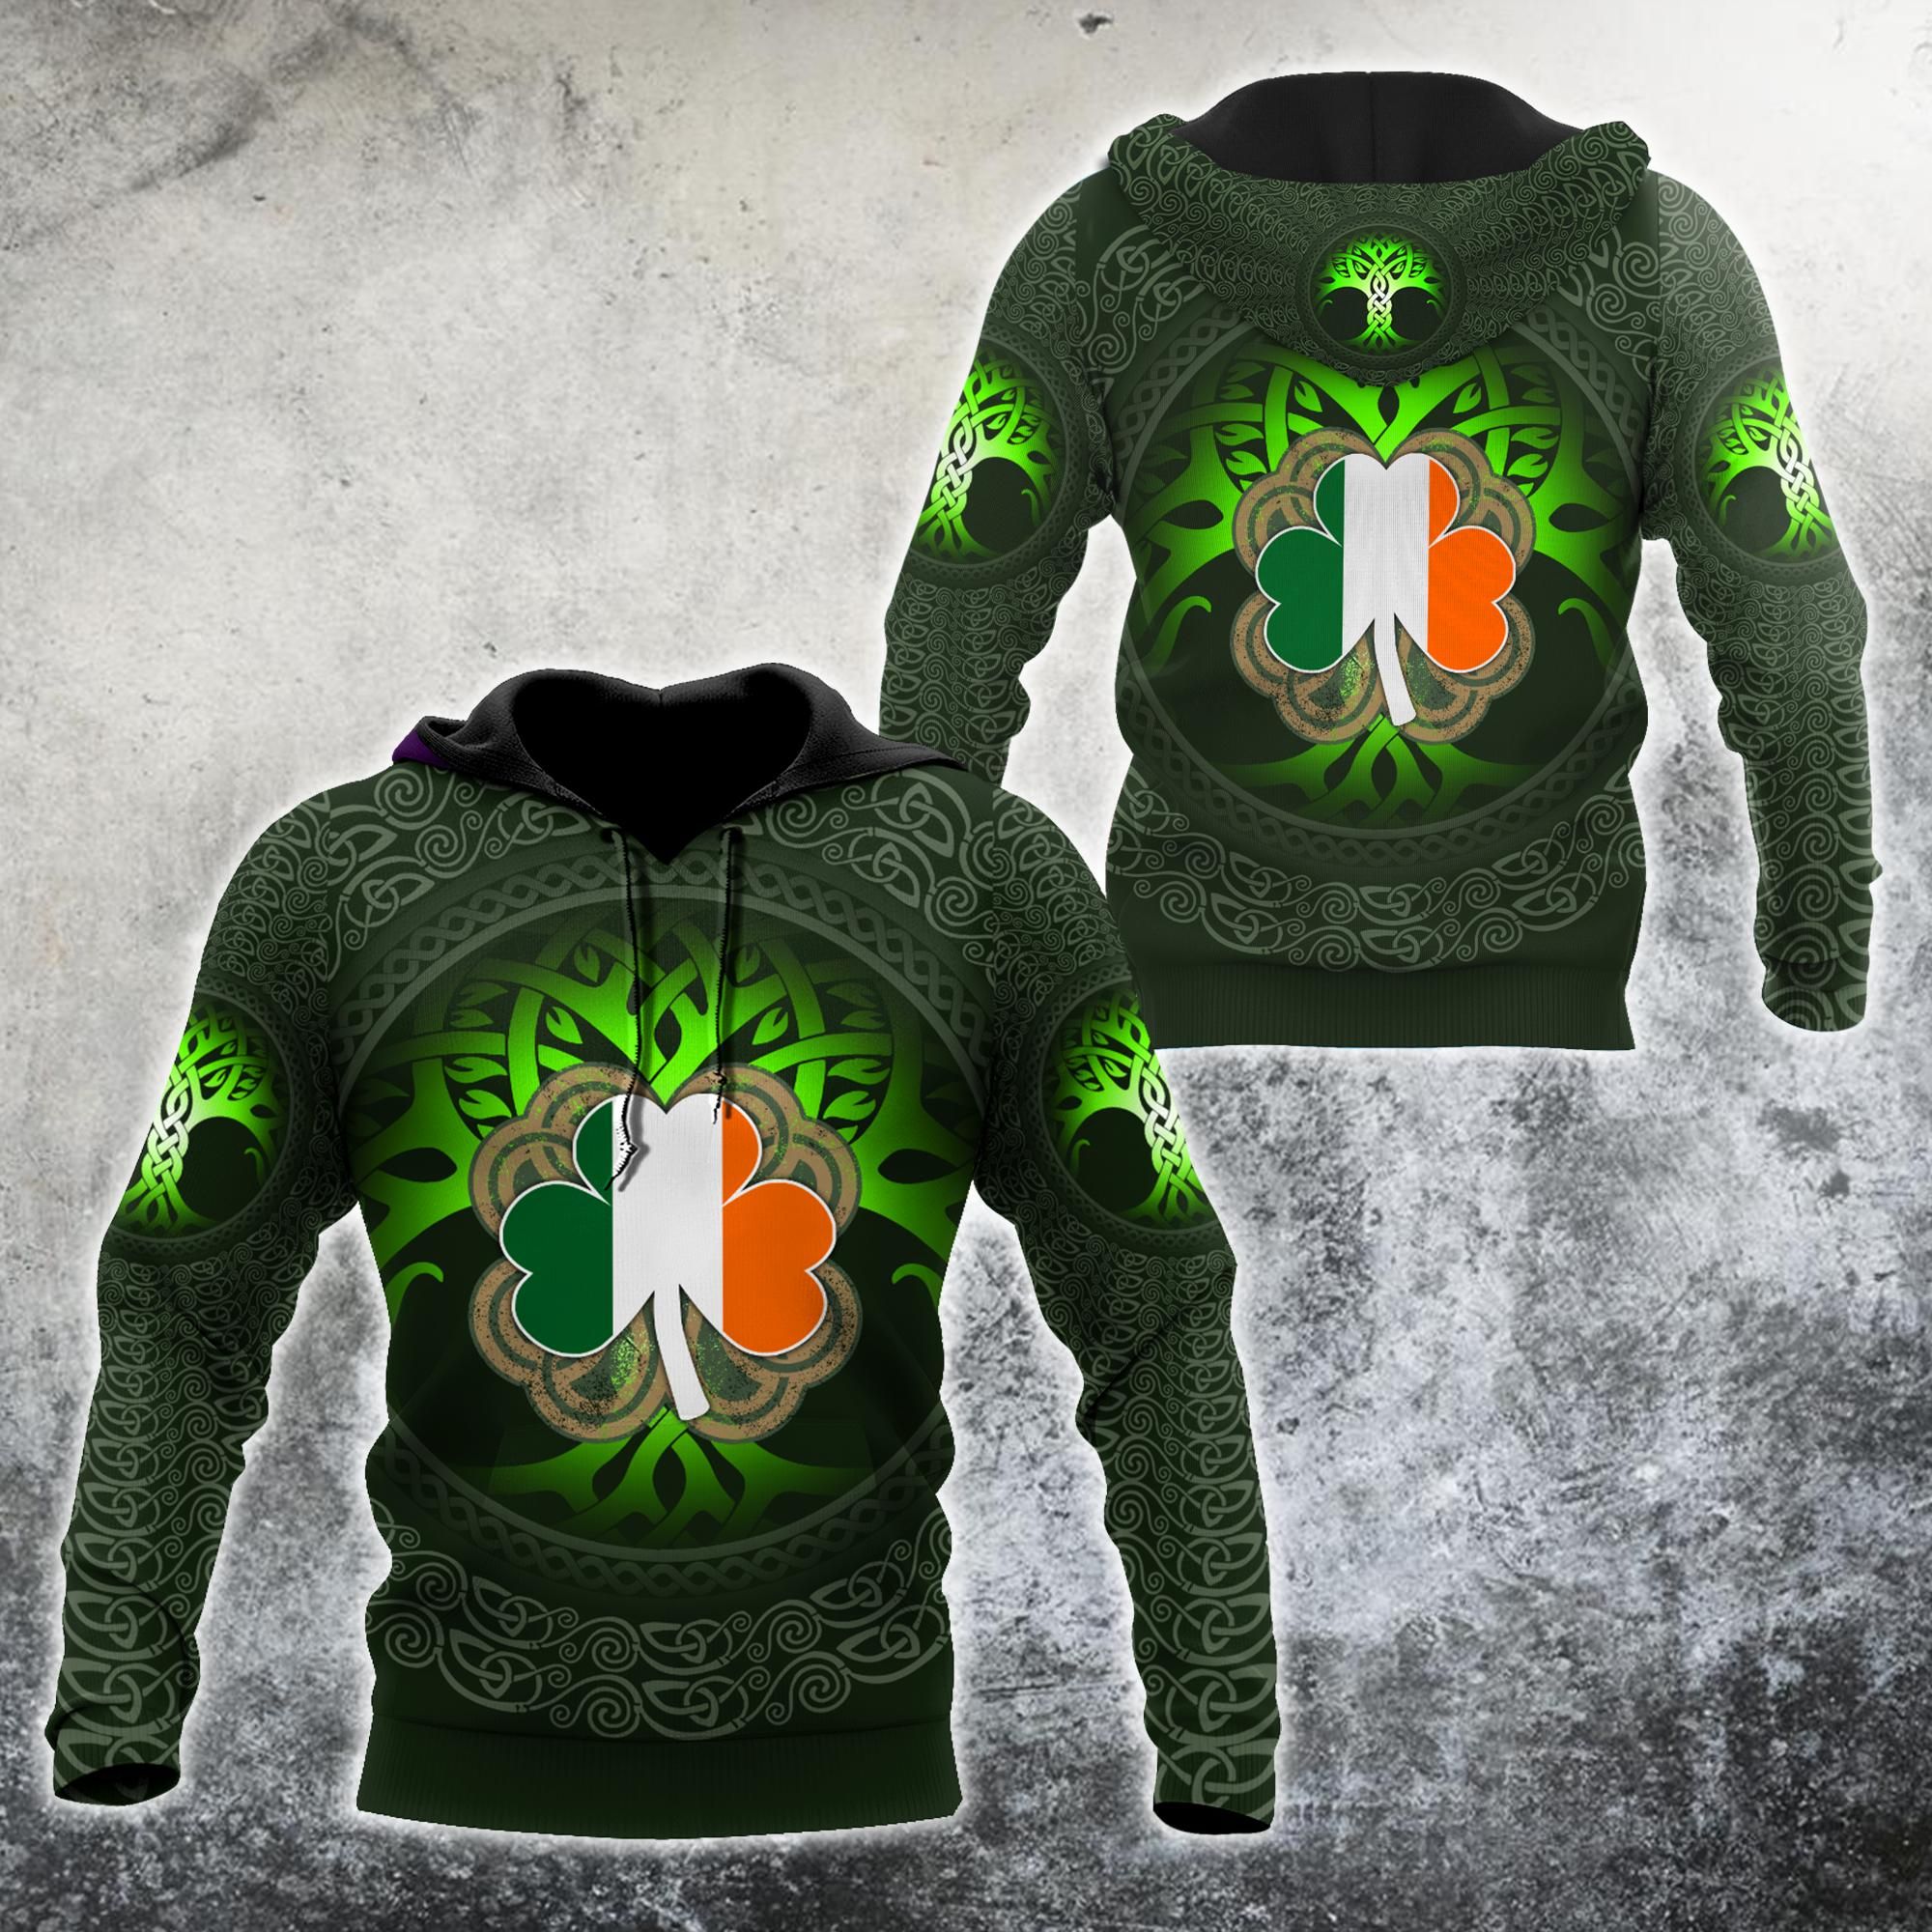 Celtic Ireland Tattoo Hoodie For Men And Women Mh04022105